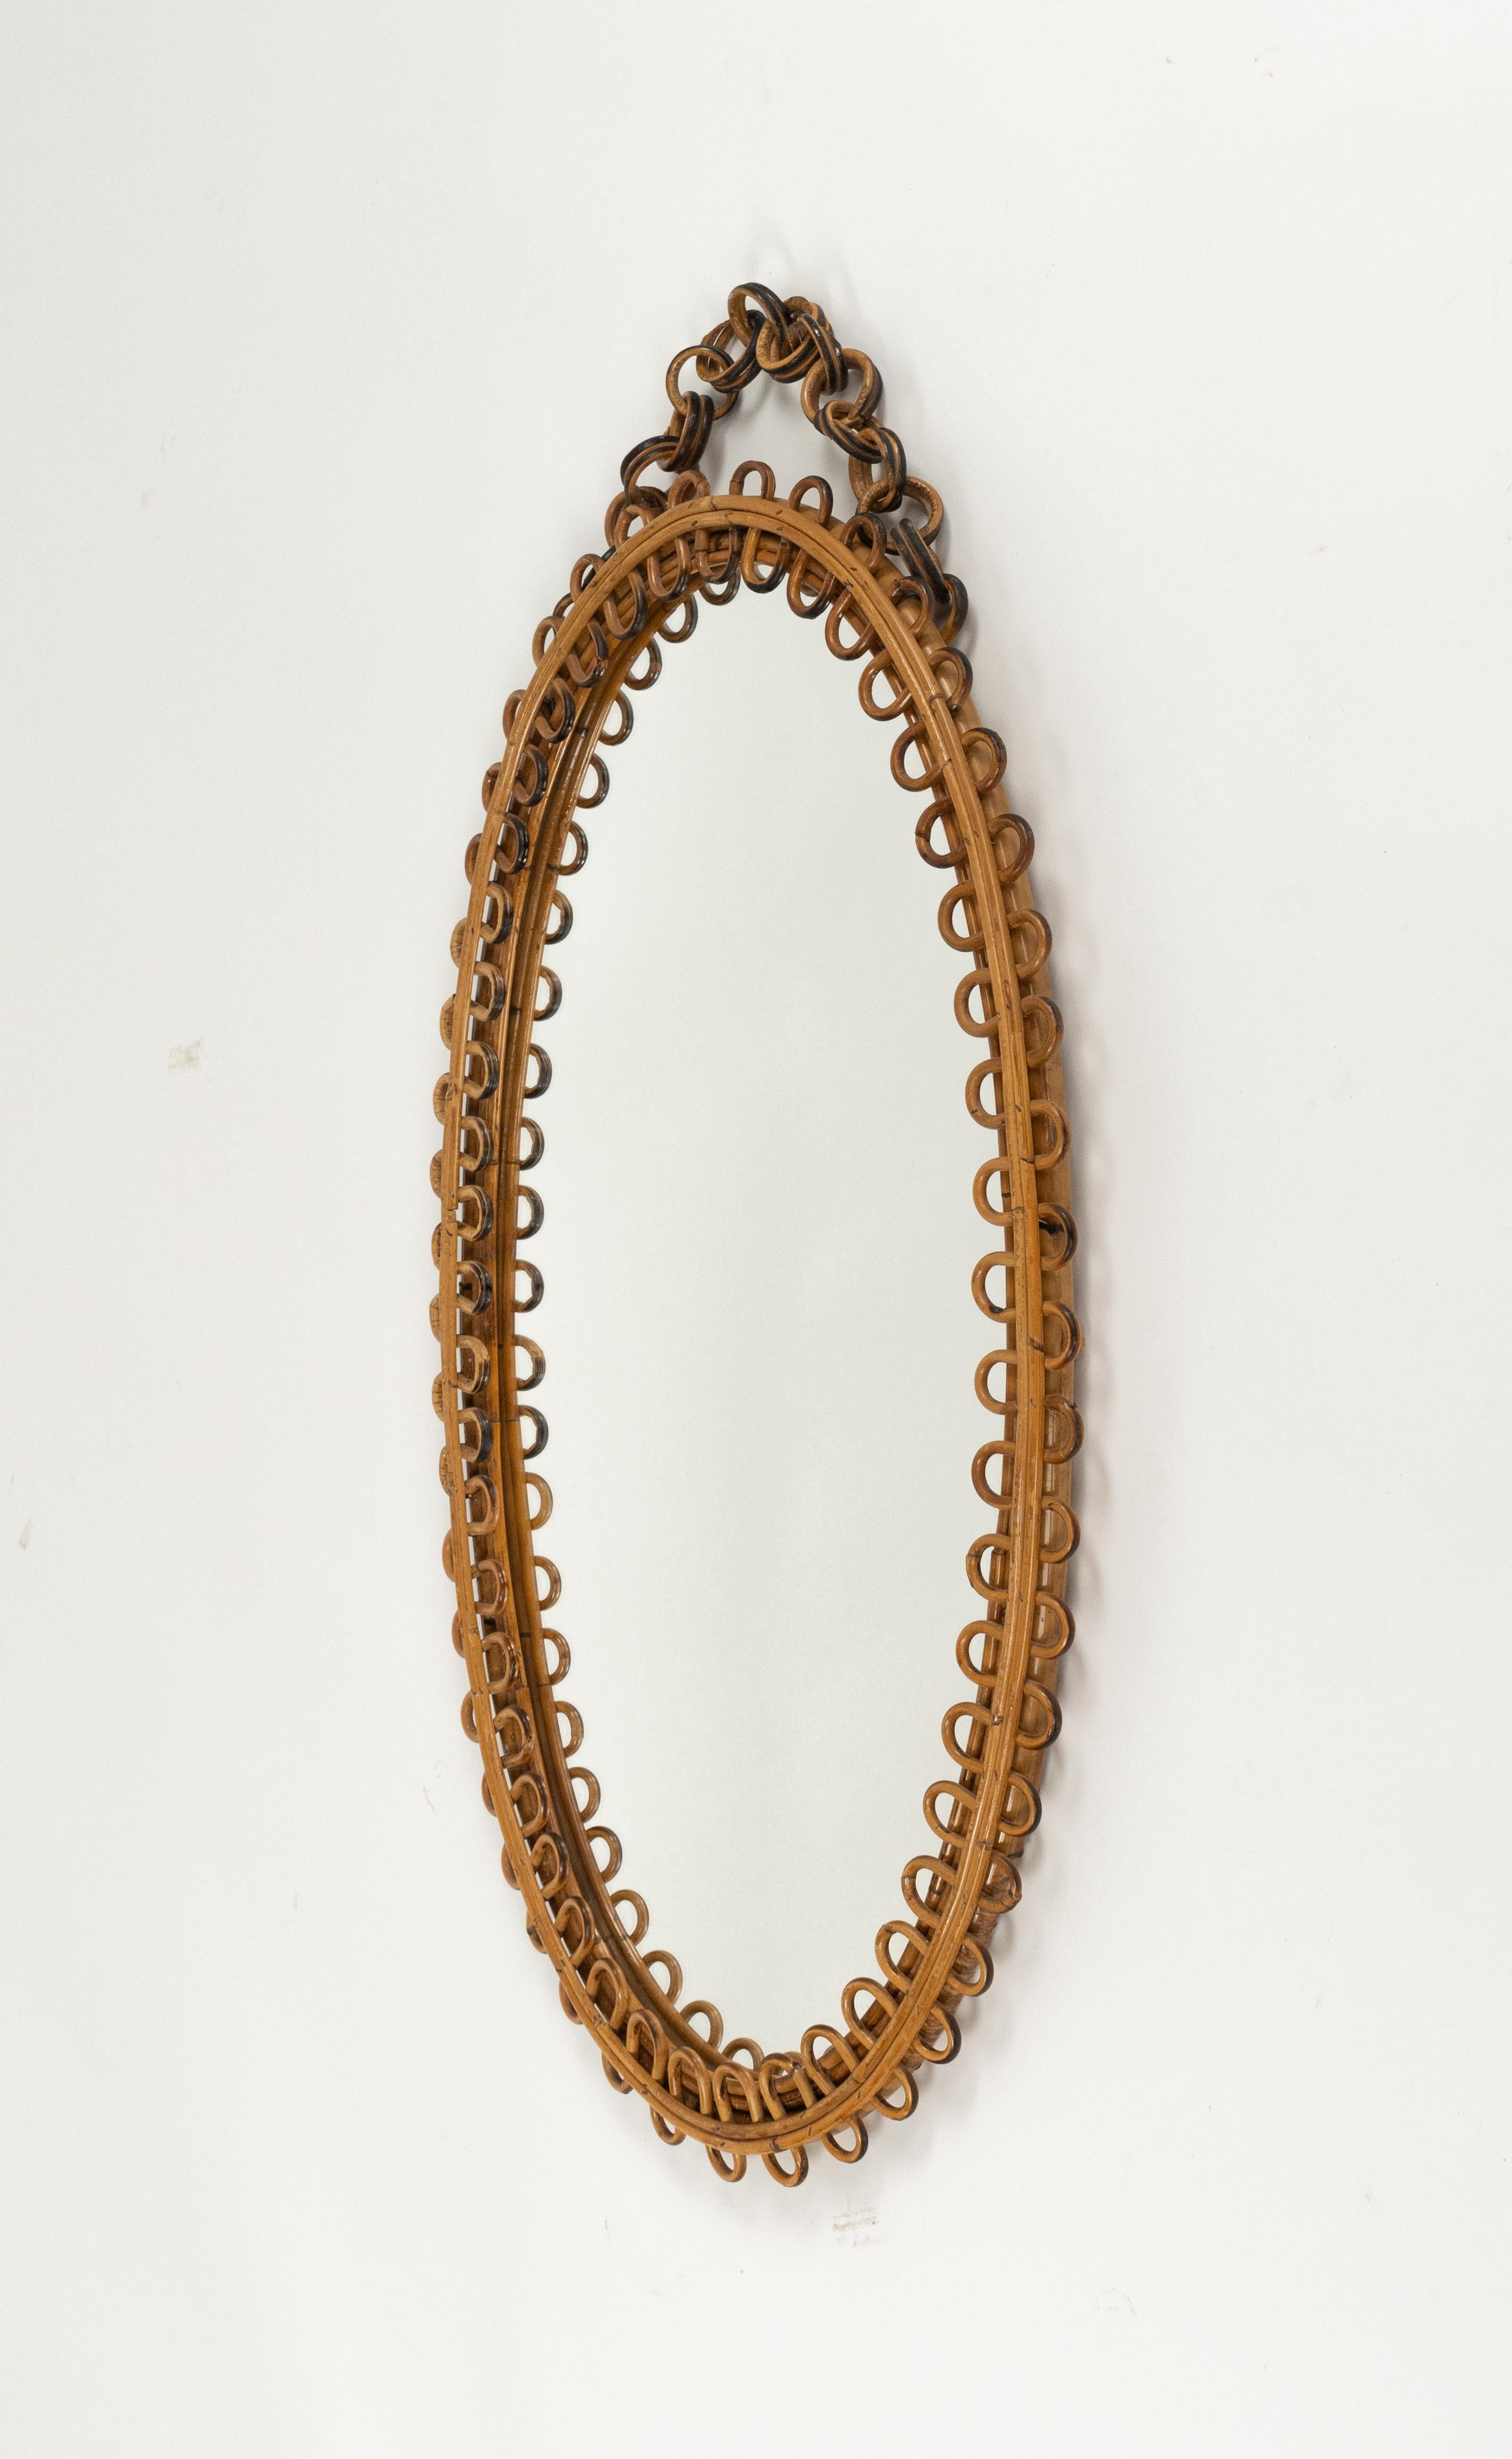 Rattan and Bamboo Oval Wall Mirror with Chain Franco Albini Style, Italy, 1960s For Sale 3